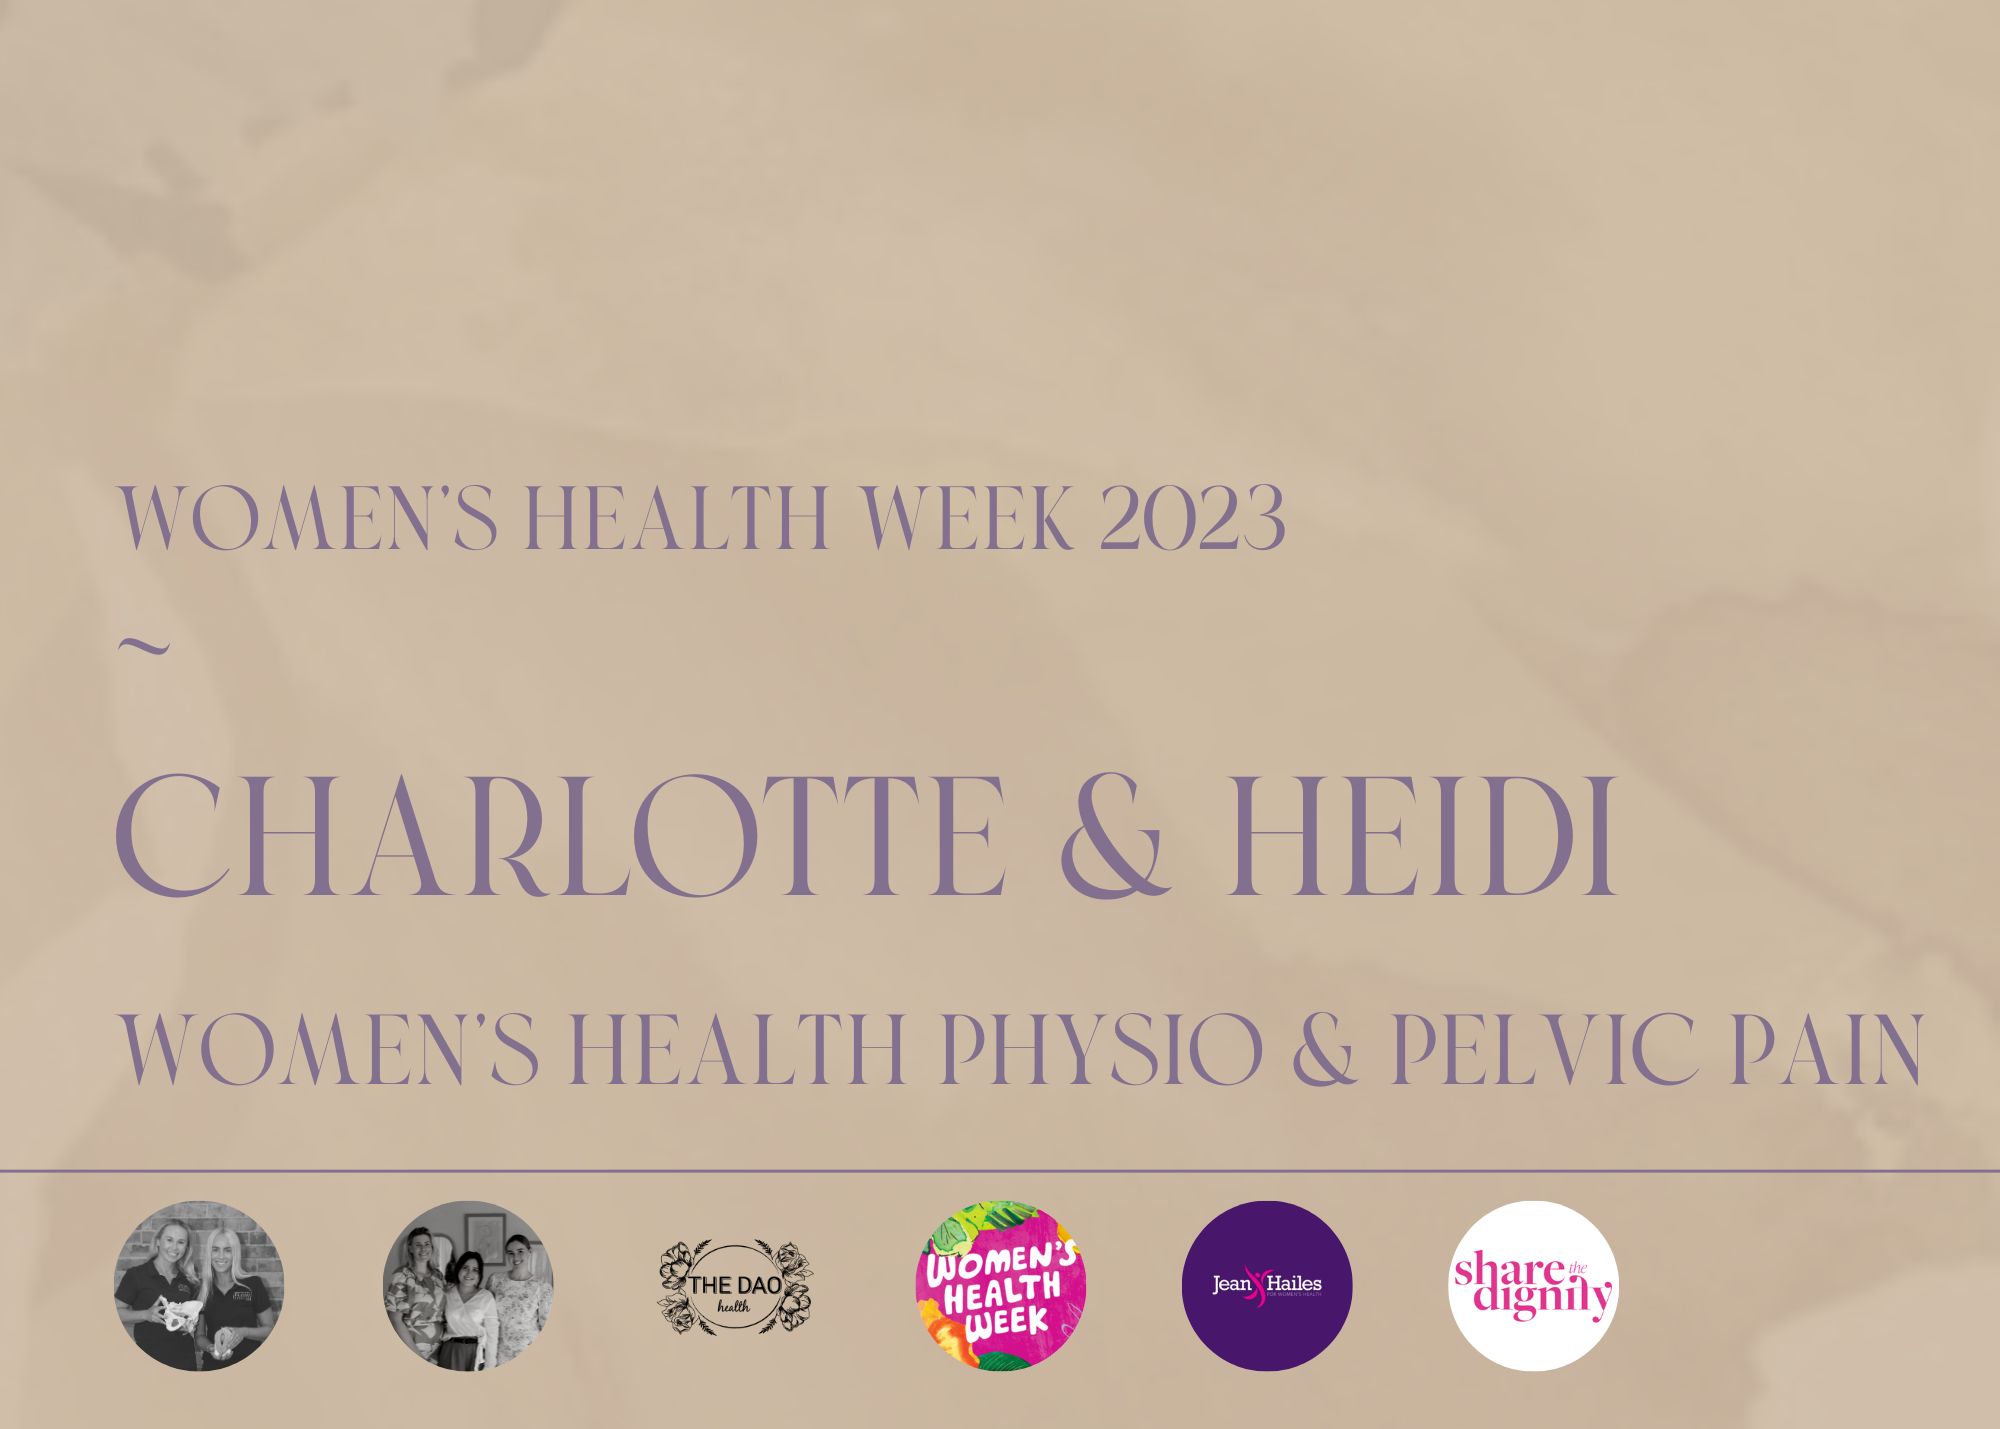 How Women’s Health Physio can Support Your Pelvic Floor and Associated Pain ~ WHW 2023